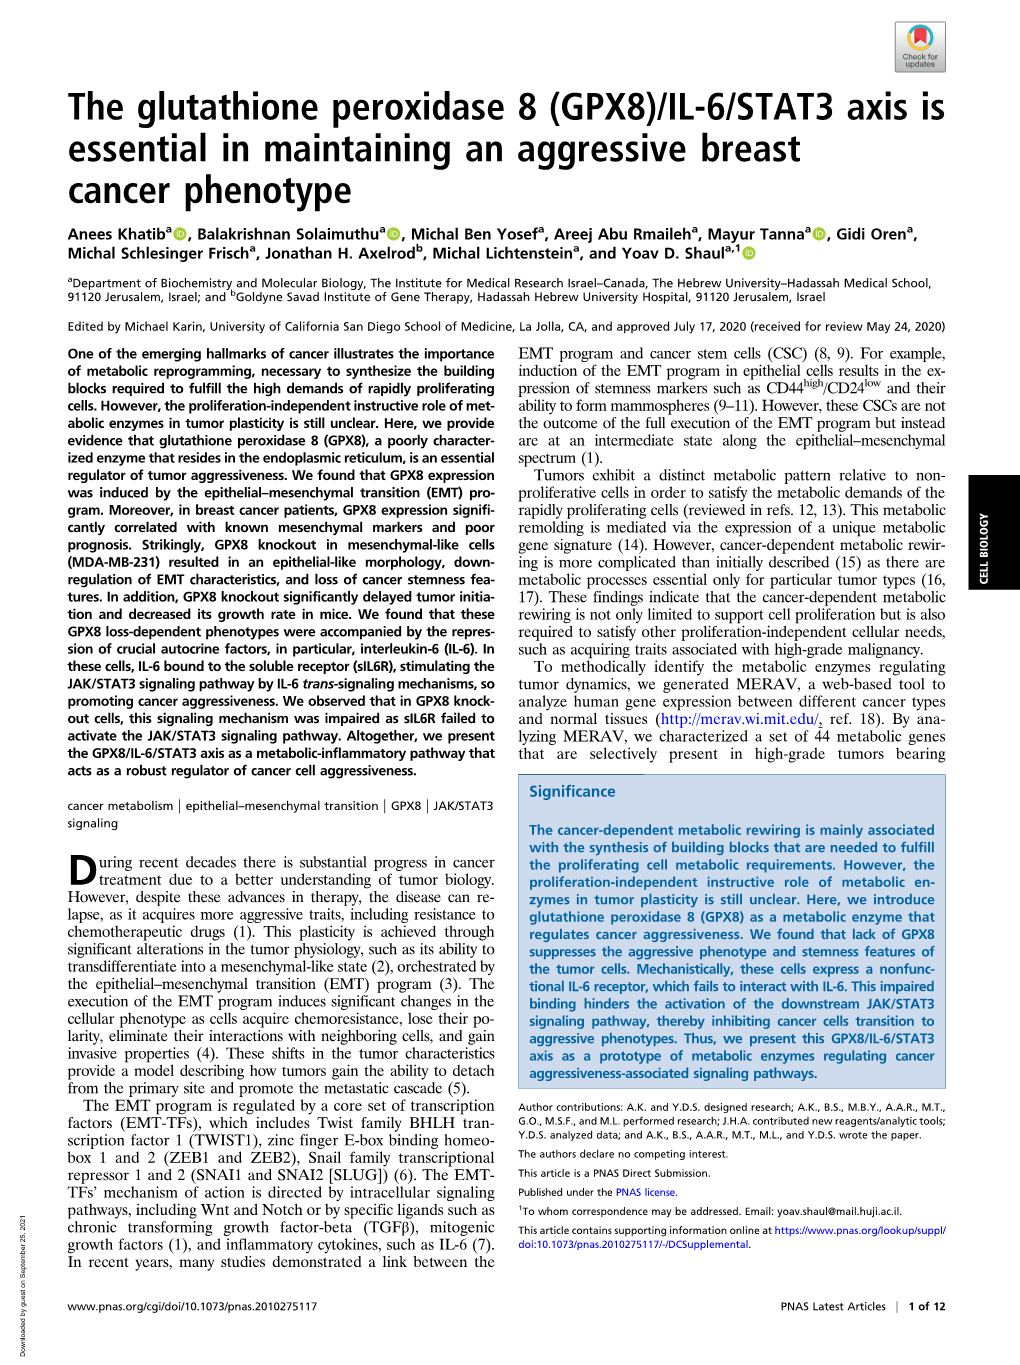 (GPX8)/IL-6/STAT3 Axis Is Essential in Maintaining an Aggressive Breast Cancer Phenotype